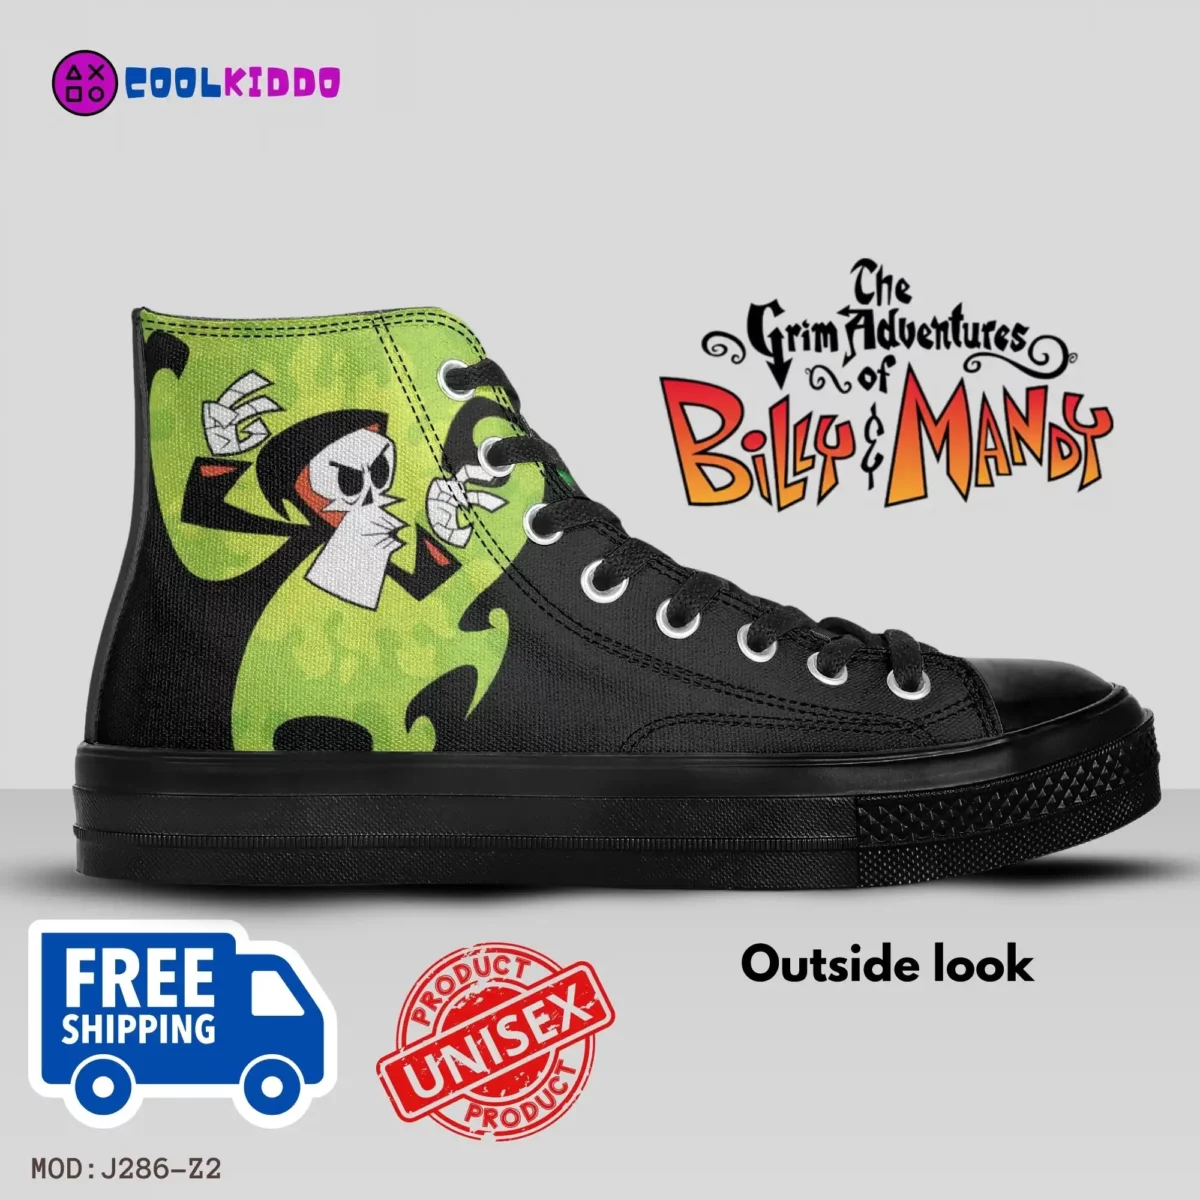 Grim Black and Green High-Top Canvas Shoes | From The Grim Adventures of Billy and Mandy | Adult/Youth – Black Sole Grim Sneakers Cool Kiddo 12